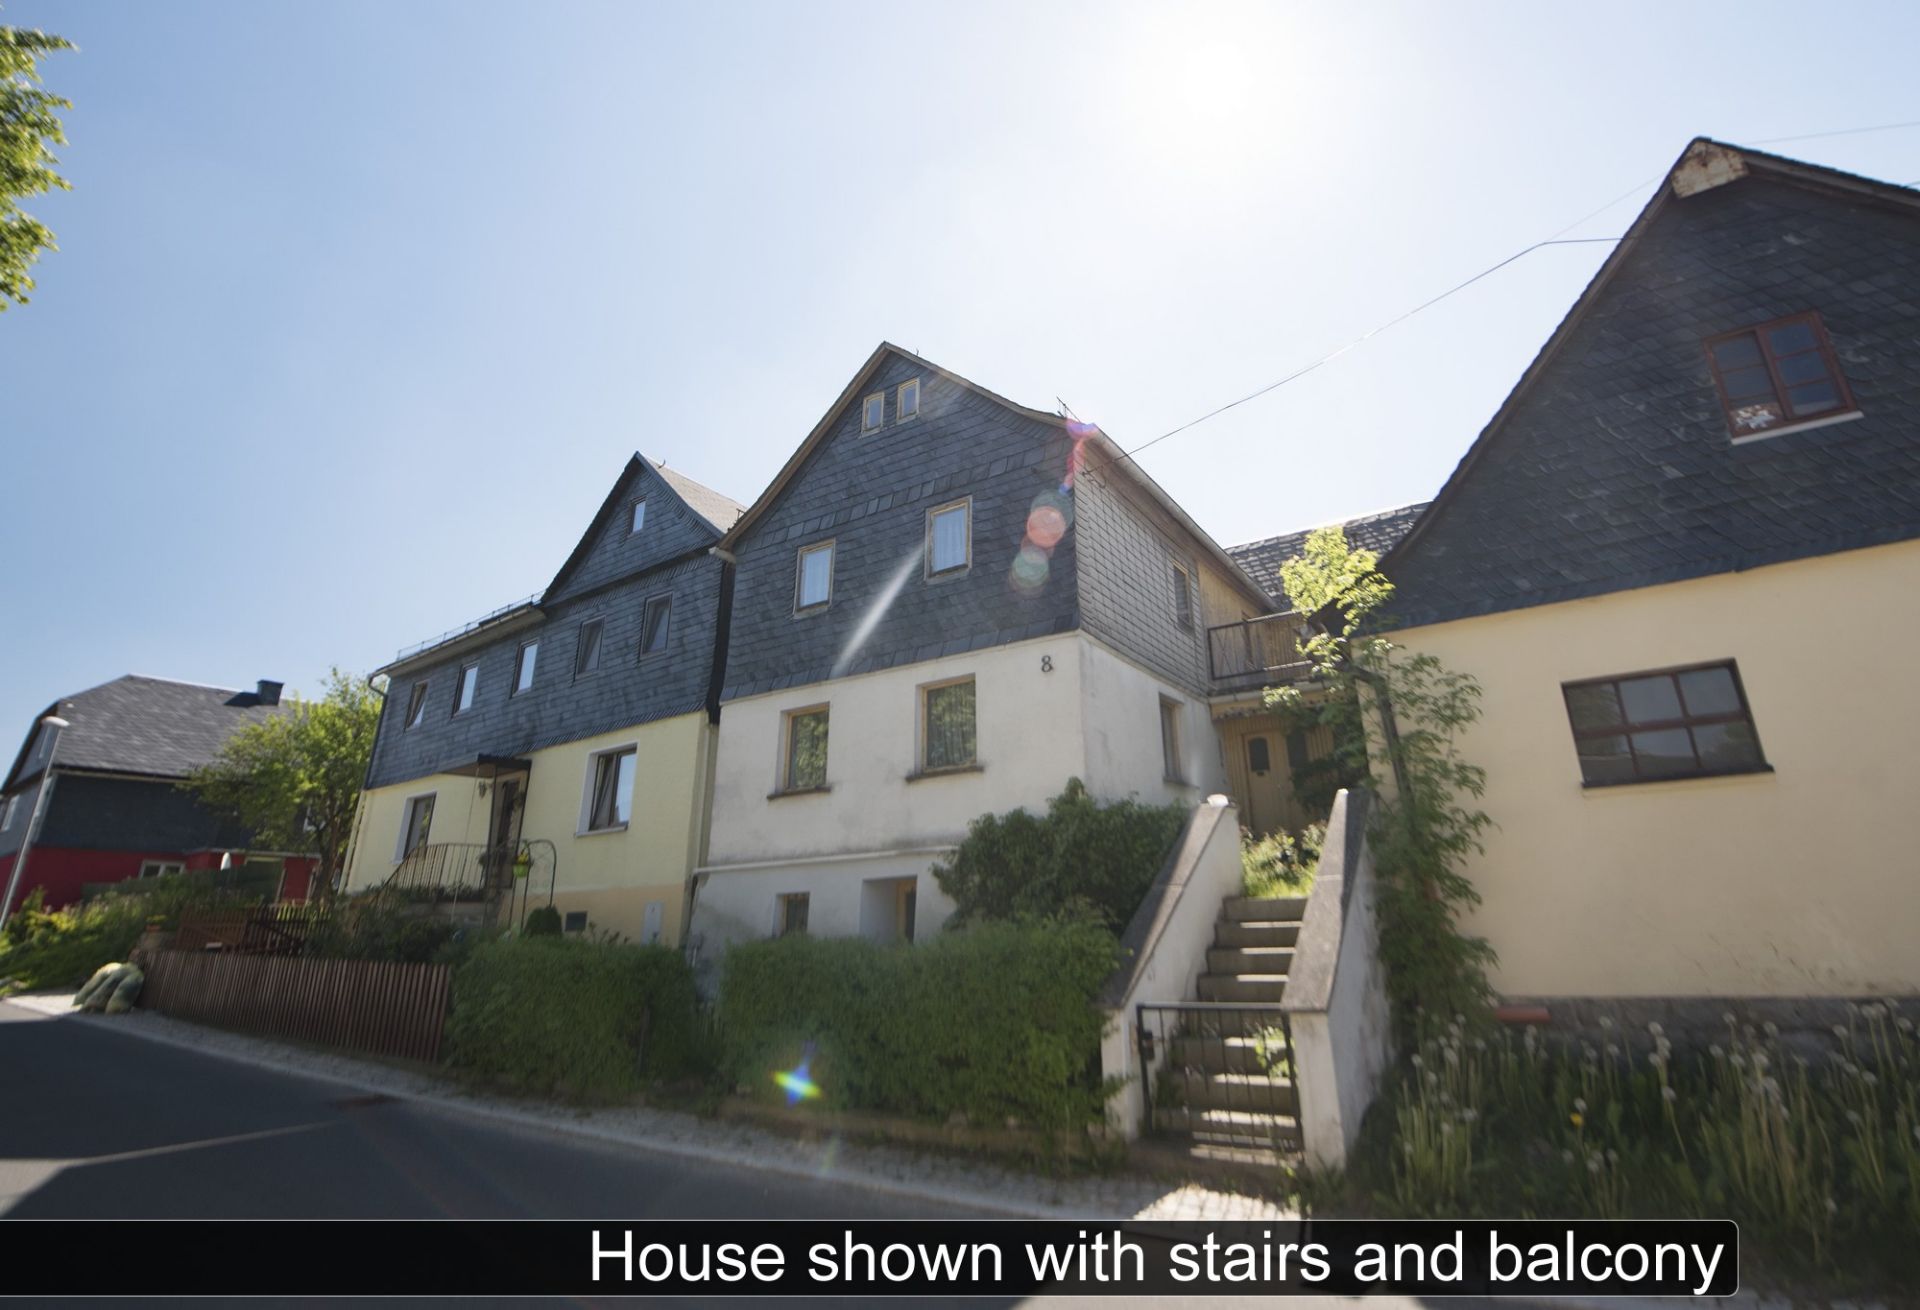 STUNNING 4 BEDROOM PROPERTY IN WURZBACH, GERMANY - Image 3 of 61